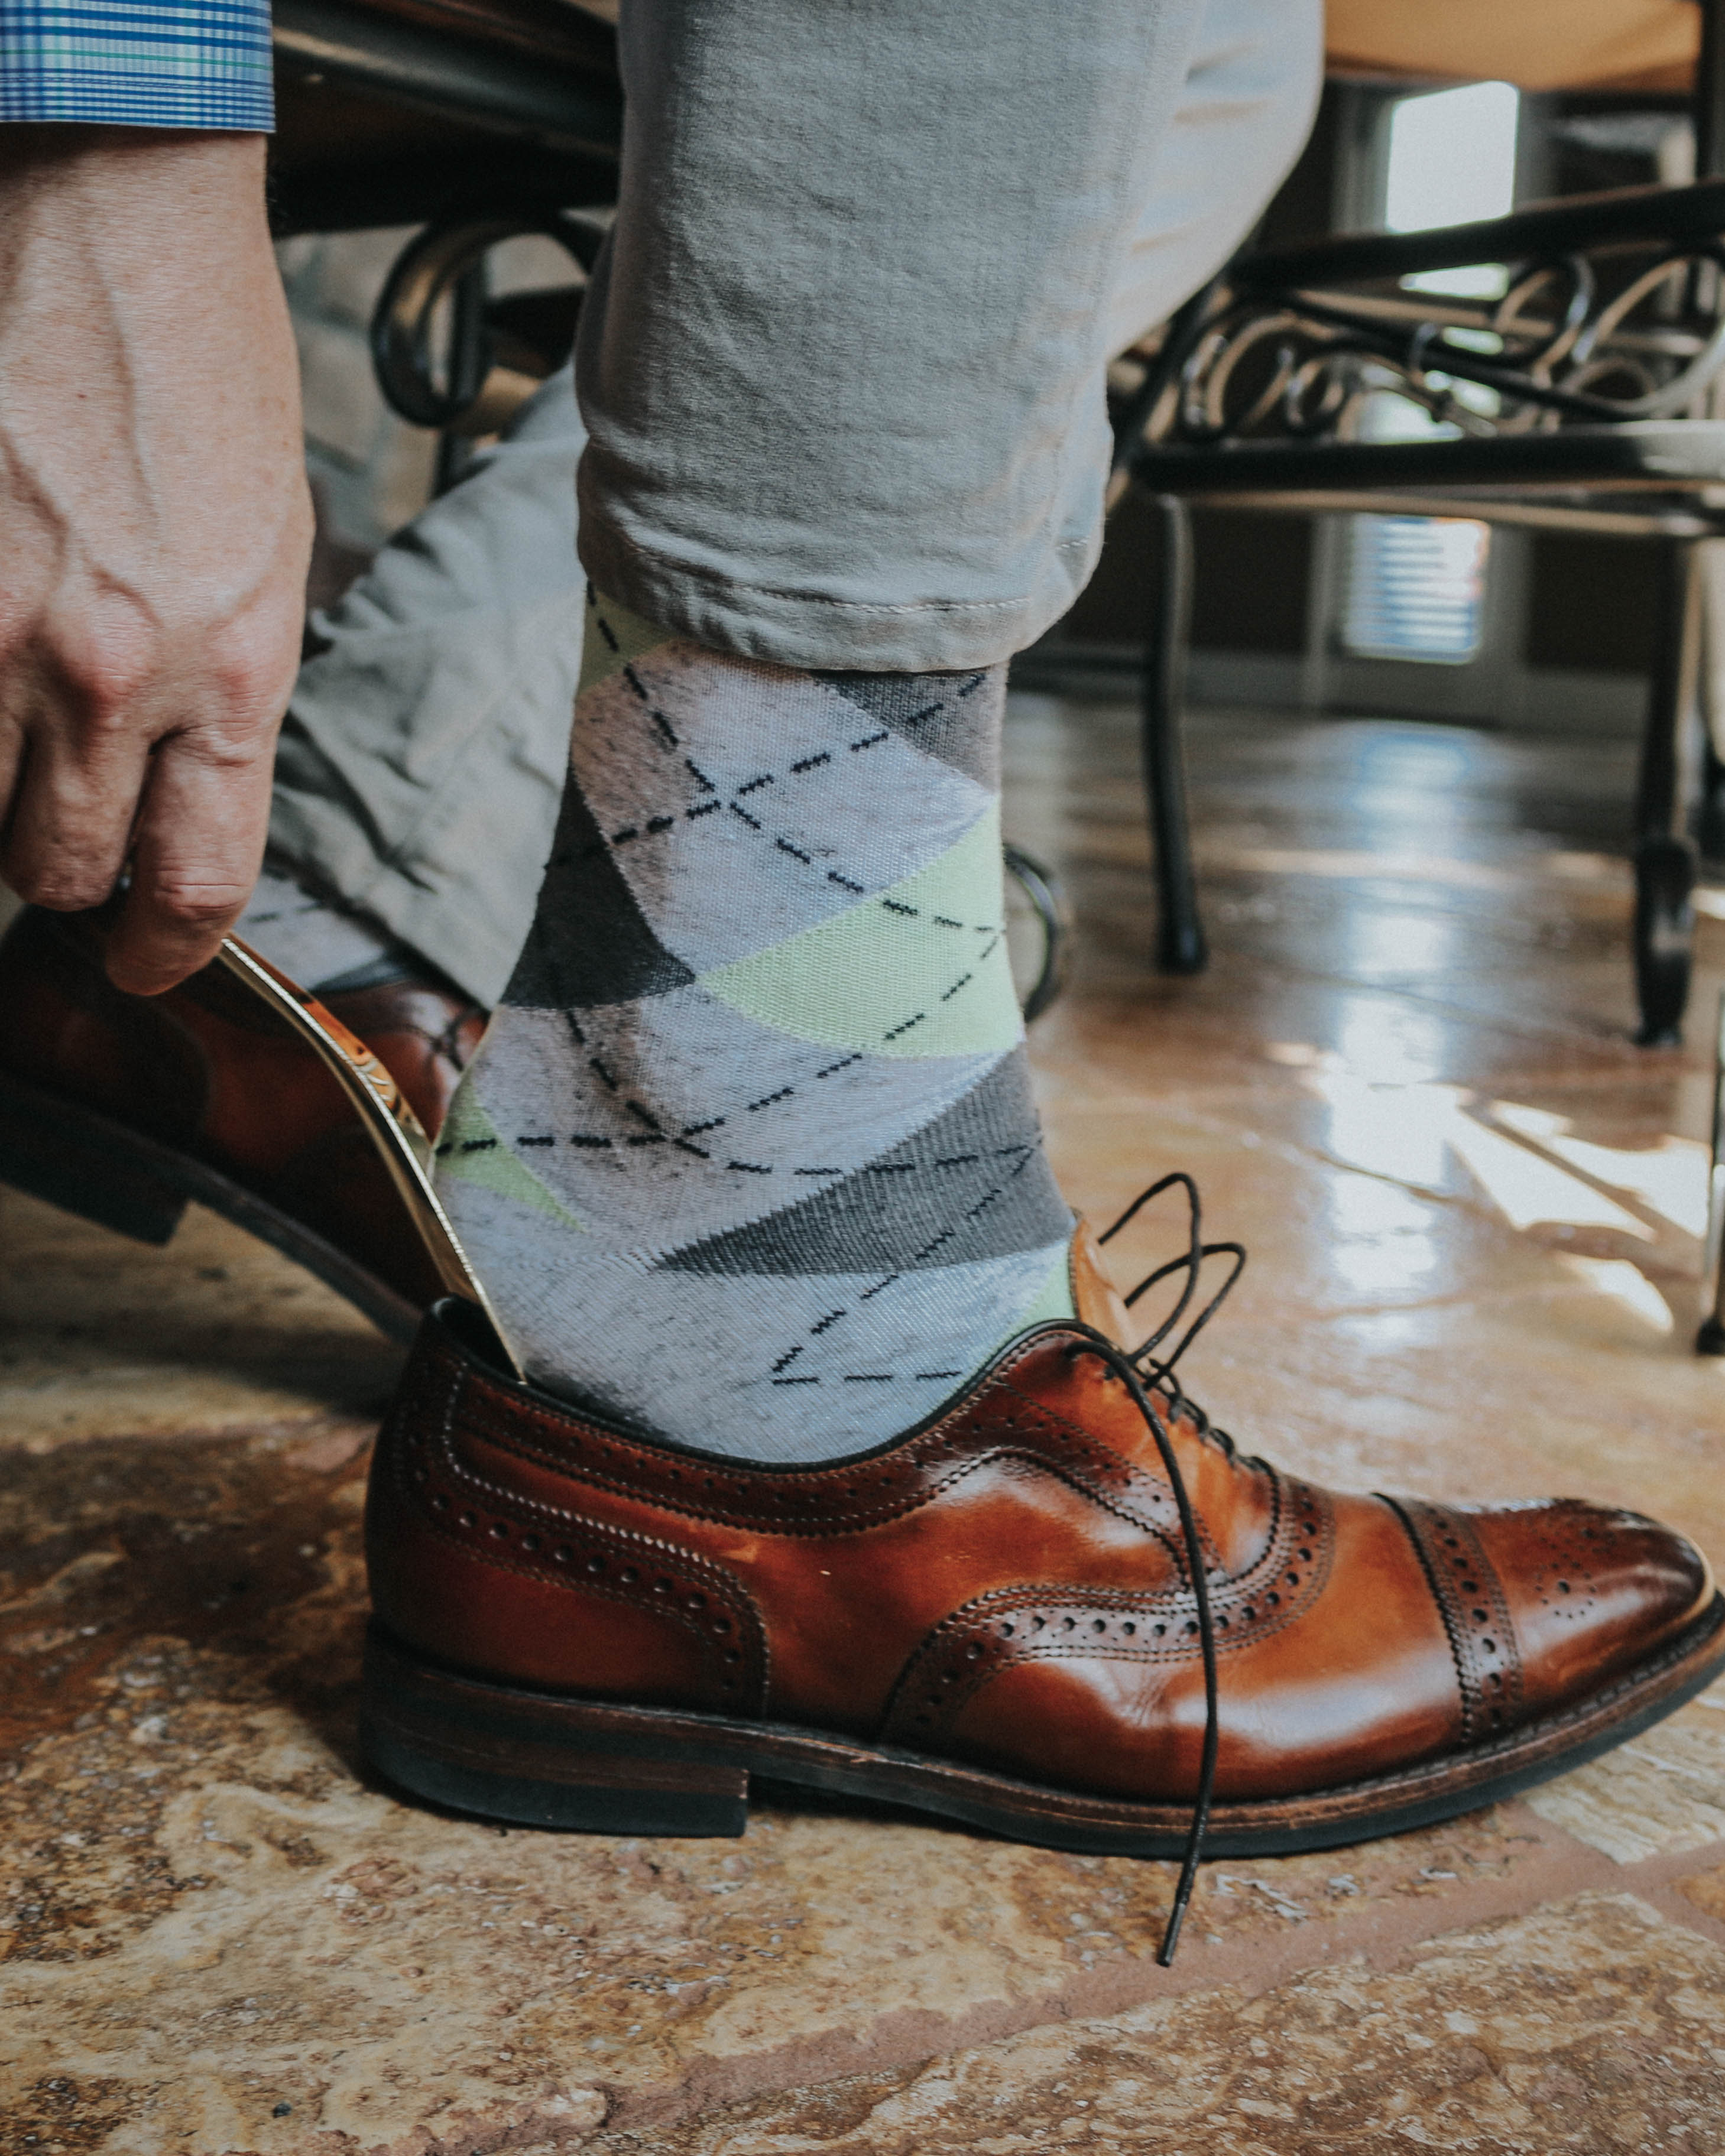 grey and green argyle print over the calf dress socks, brown dress shoes, grey casual pants